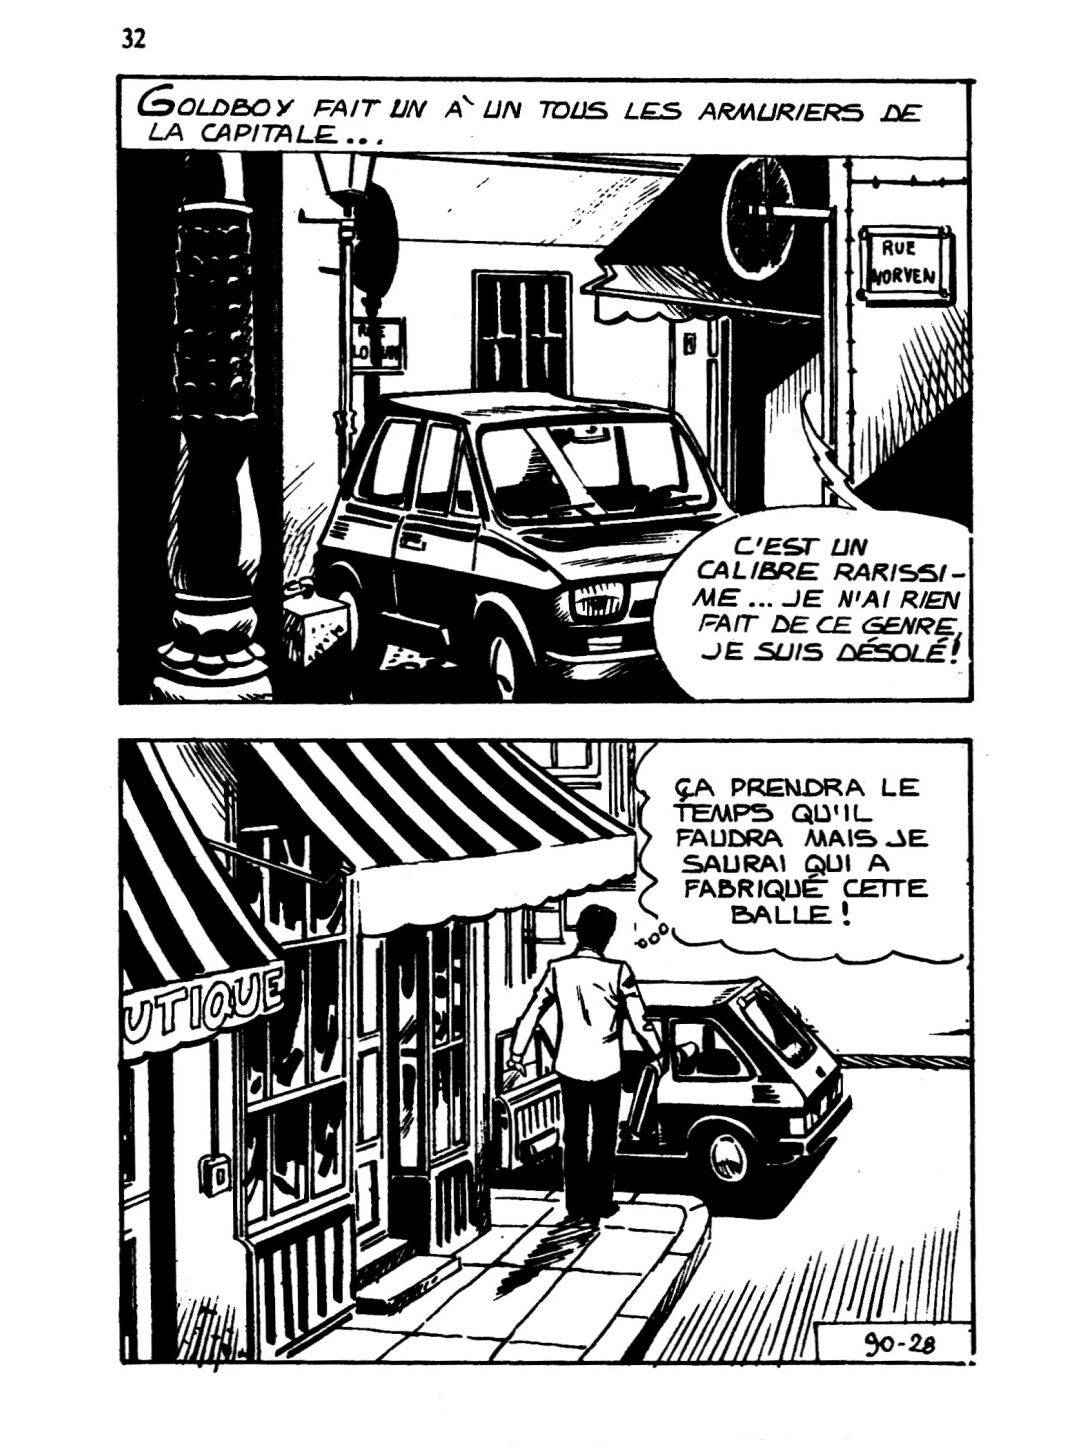 Goldboy N°90 - Chauds les marrons... d'Inde [French] 31